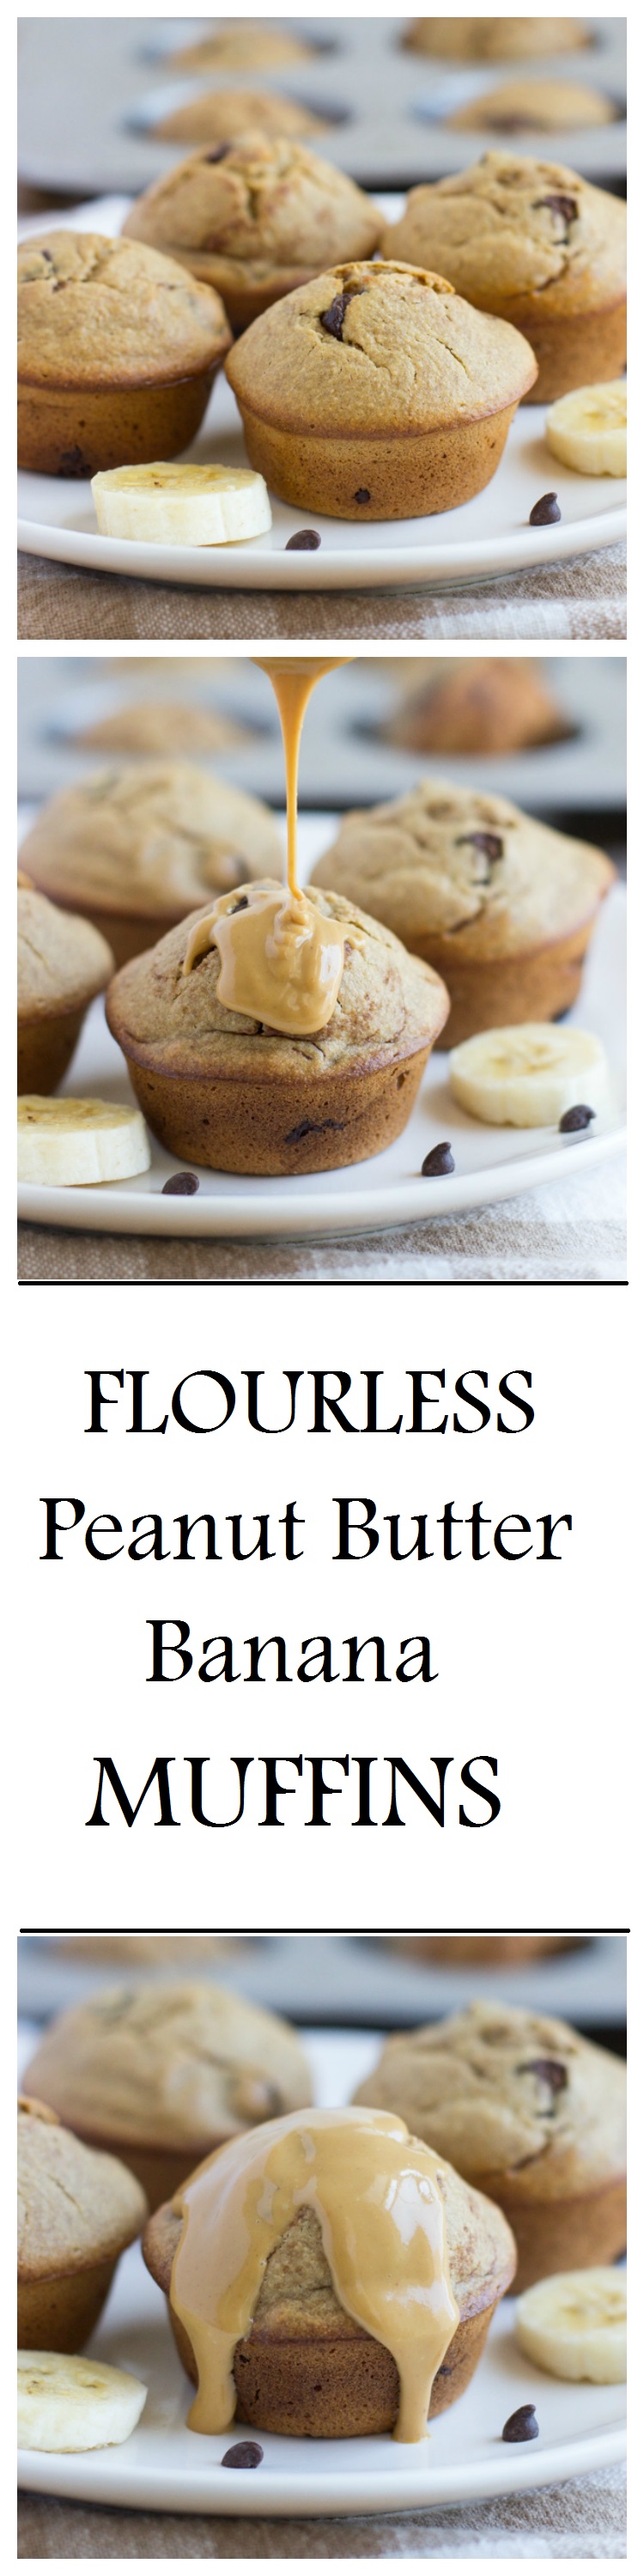 Flourless Peanut Butter Banana Muffins- made without dairy, gluten, oil OR refined sugar. One muffin has as much protein as an egg! They're so moist and delicious, you would never guess that they’re healthy!